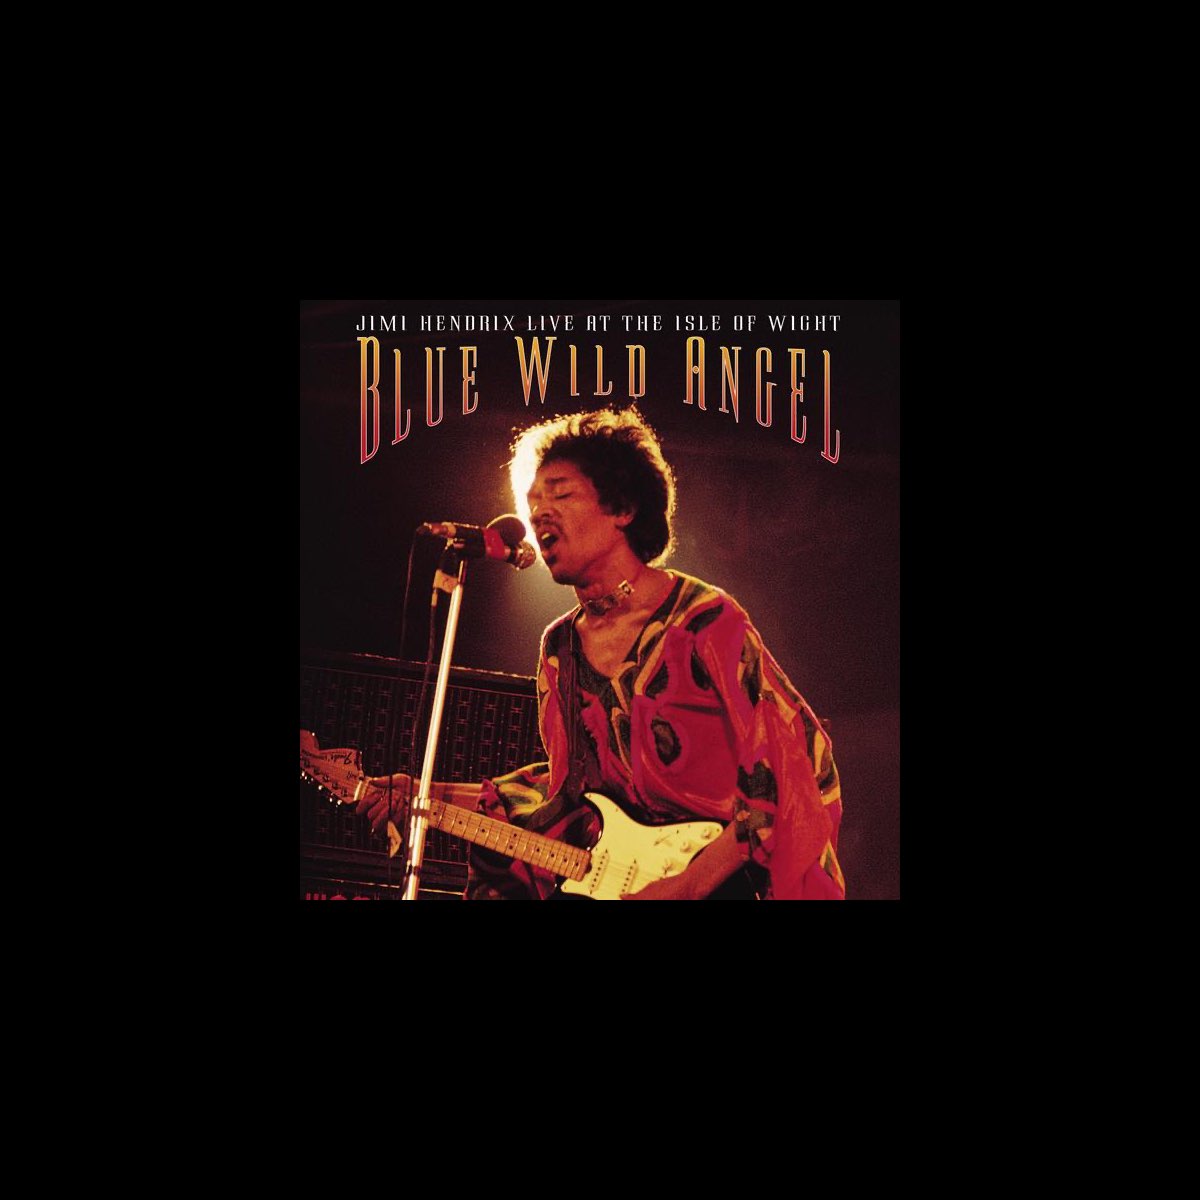 Blue Wild Angel: Live At the Isle of Wight - Album by Jimi Hendrix 